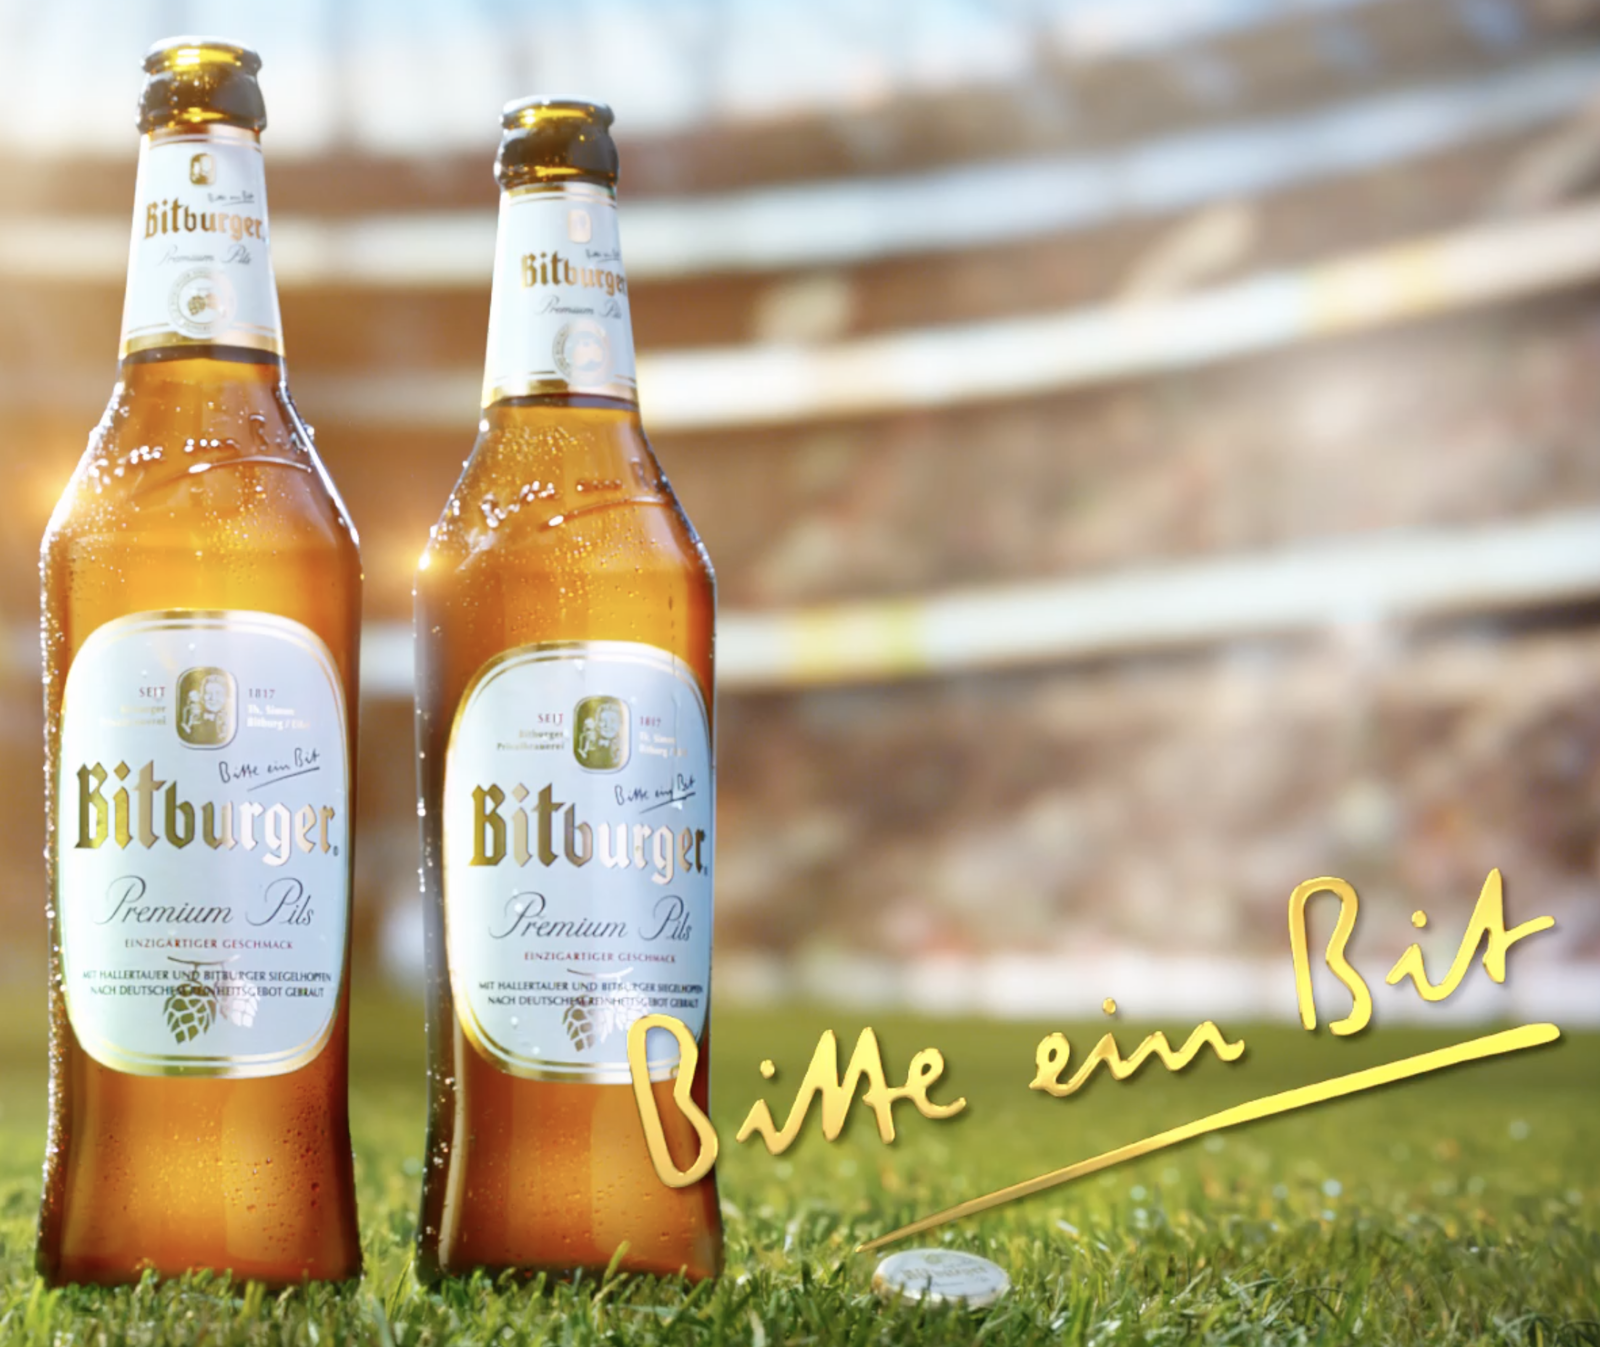 Bitburger Beer And The UEFA/EURO Cup 2020-2021